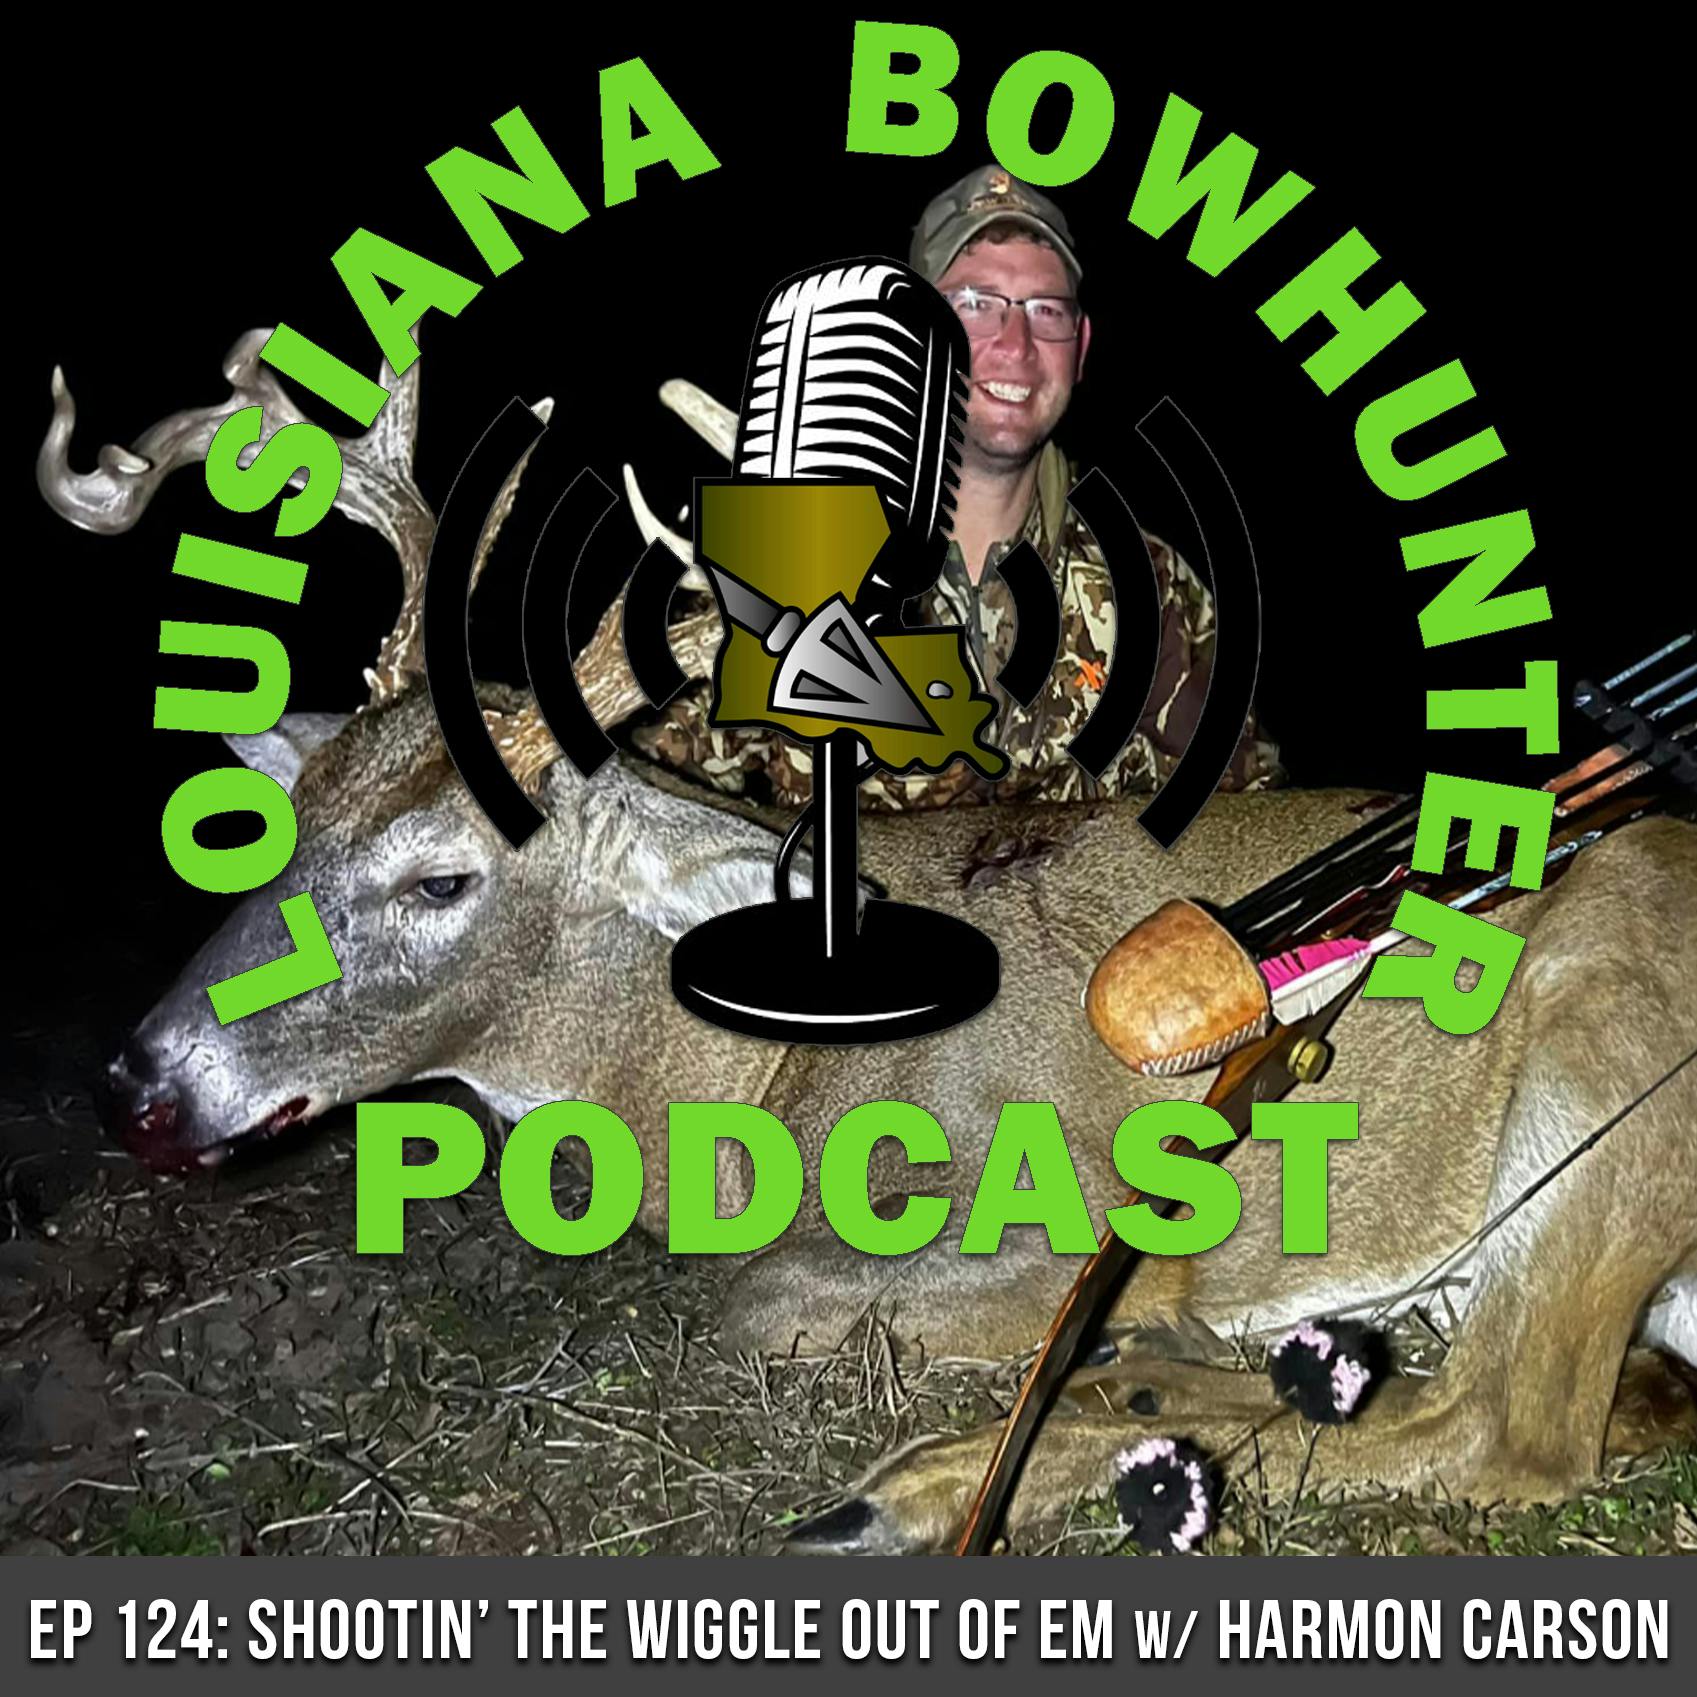 Episode 124: Shootin' The Wiggle Out of Em w/ Harmon Carson